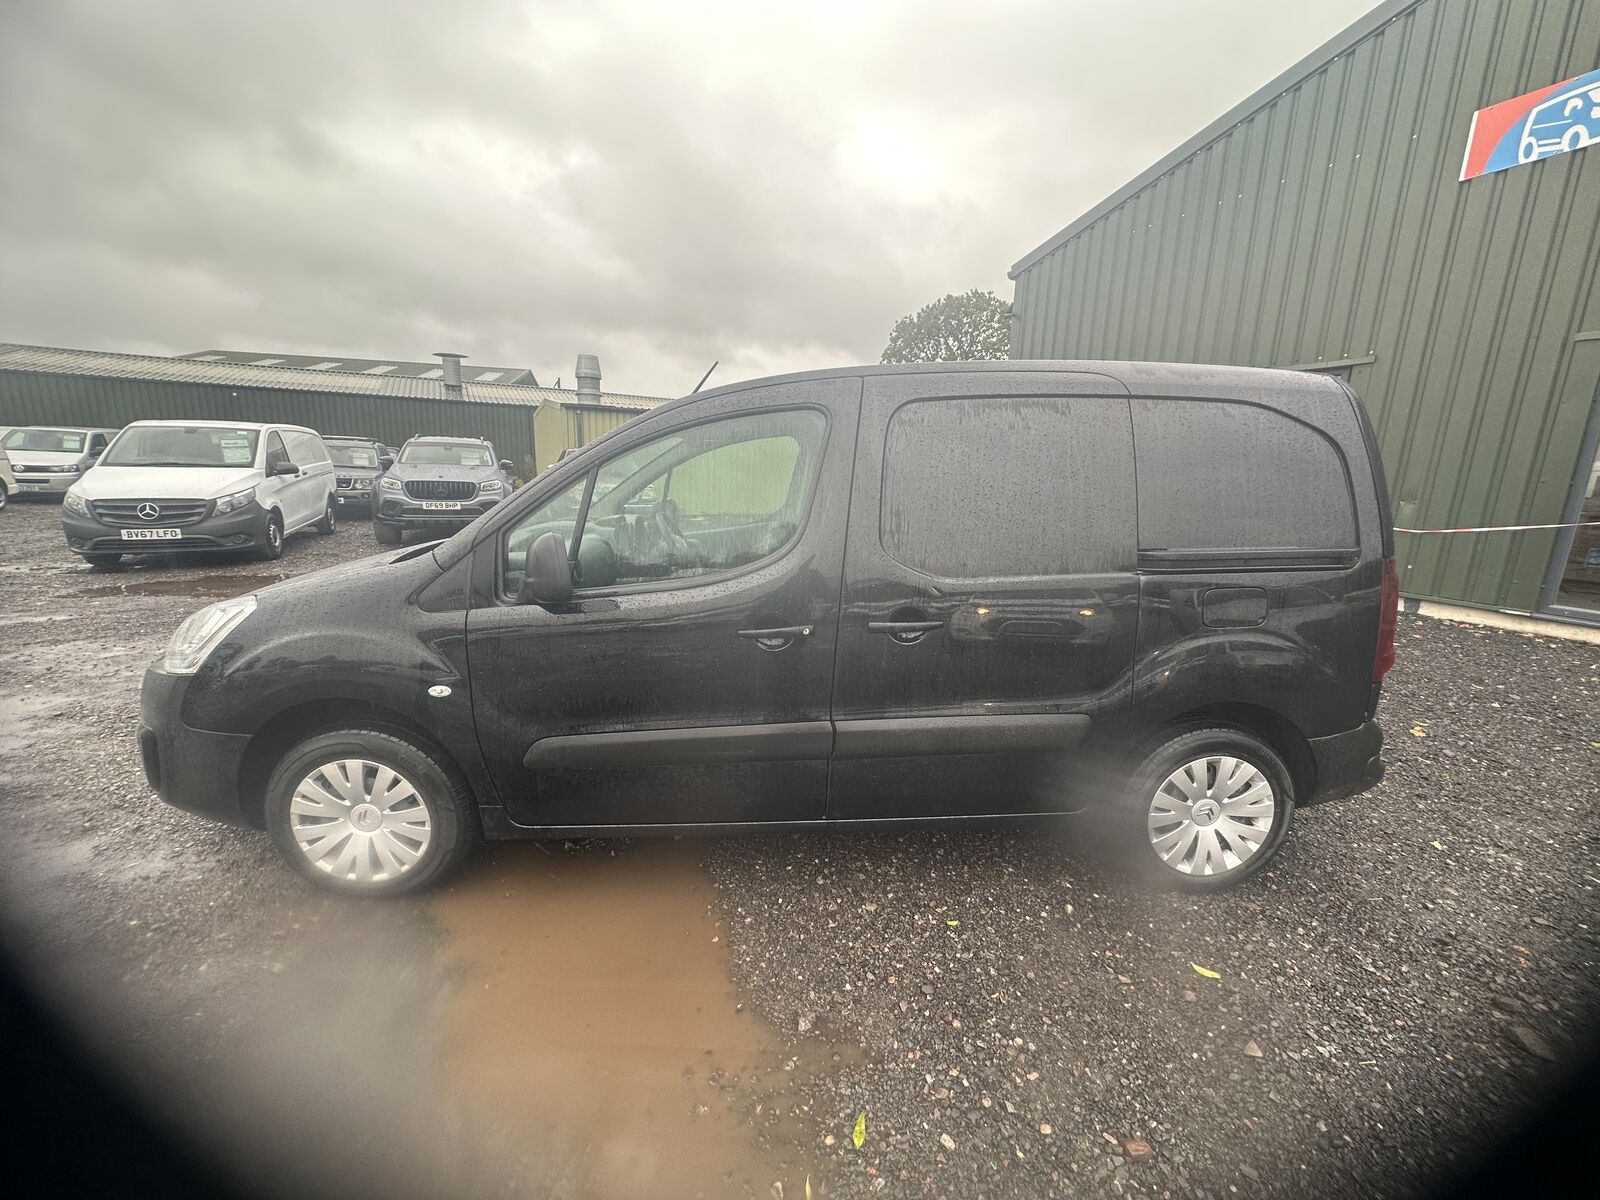 Bid on CLEAN AND EFFICIENT: 2018 CITROEN BERLINGO 1.6 BLUEHDI - MOT AUG 2024 - NO VAT ON HAMMER- Buy &amp; Sell on Auction with EAMA Group